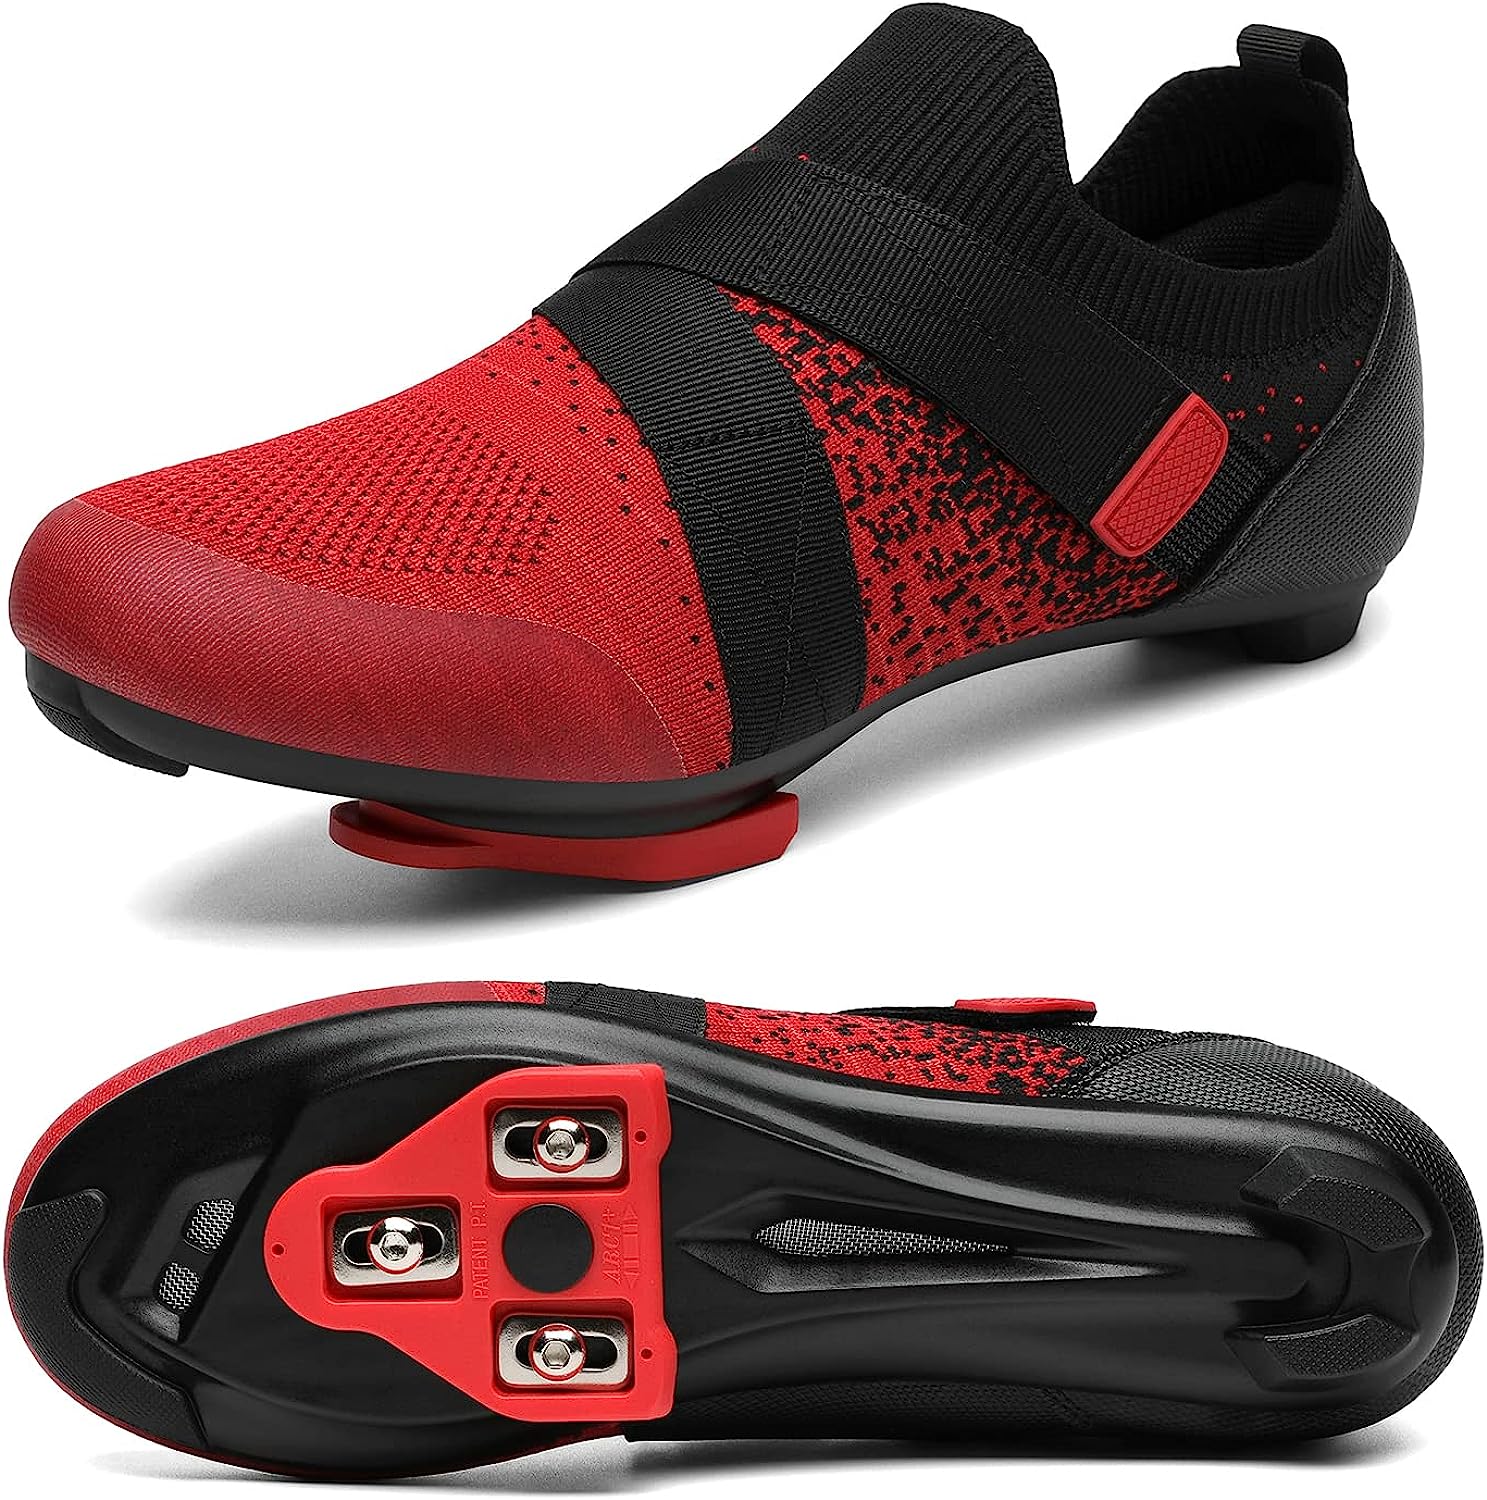 Unisex Cycling Shoes Compatible with Peloton Bike & [...]